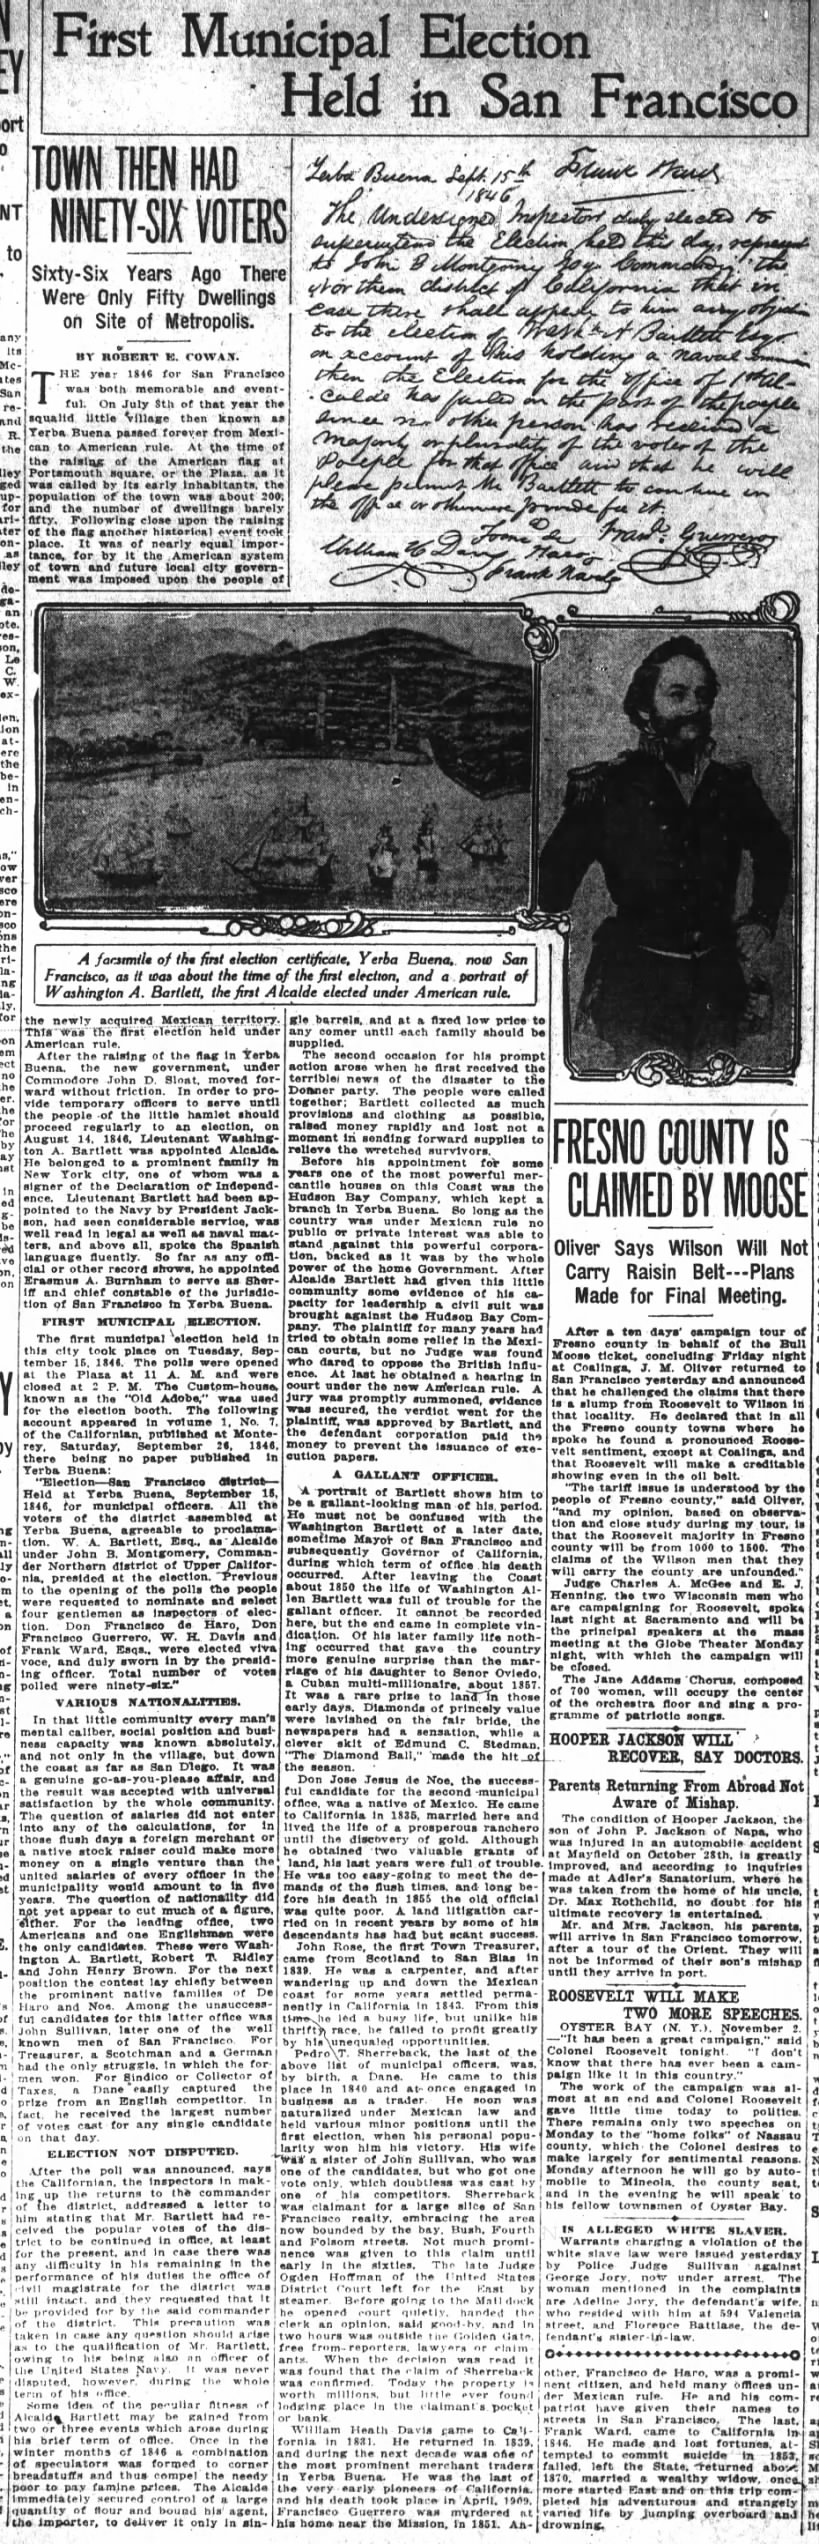 First Municipal Election Held in San Francisco